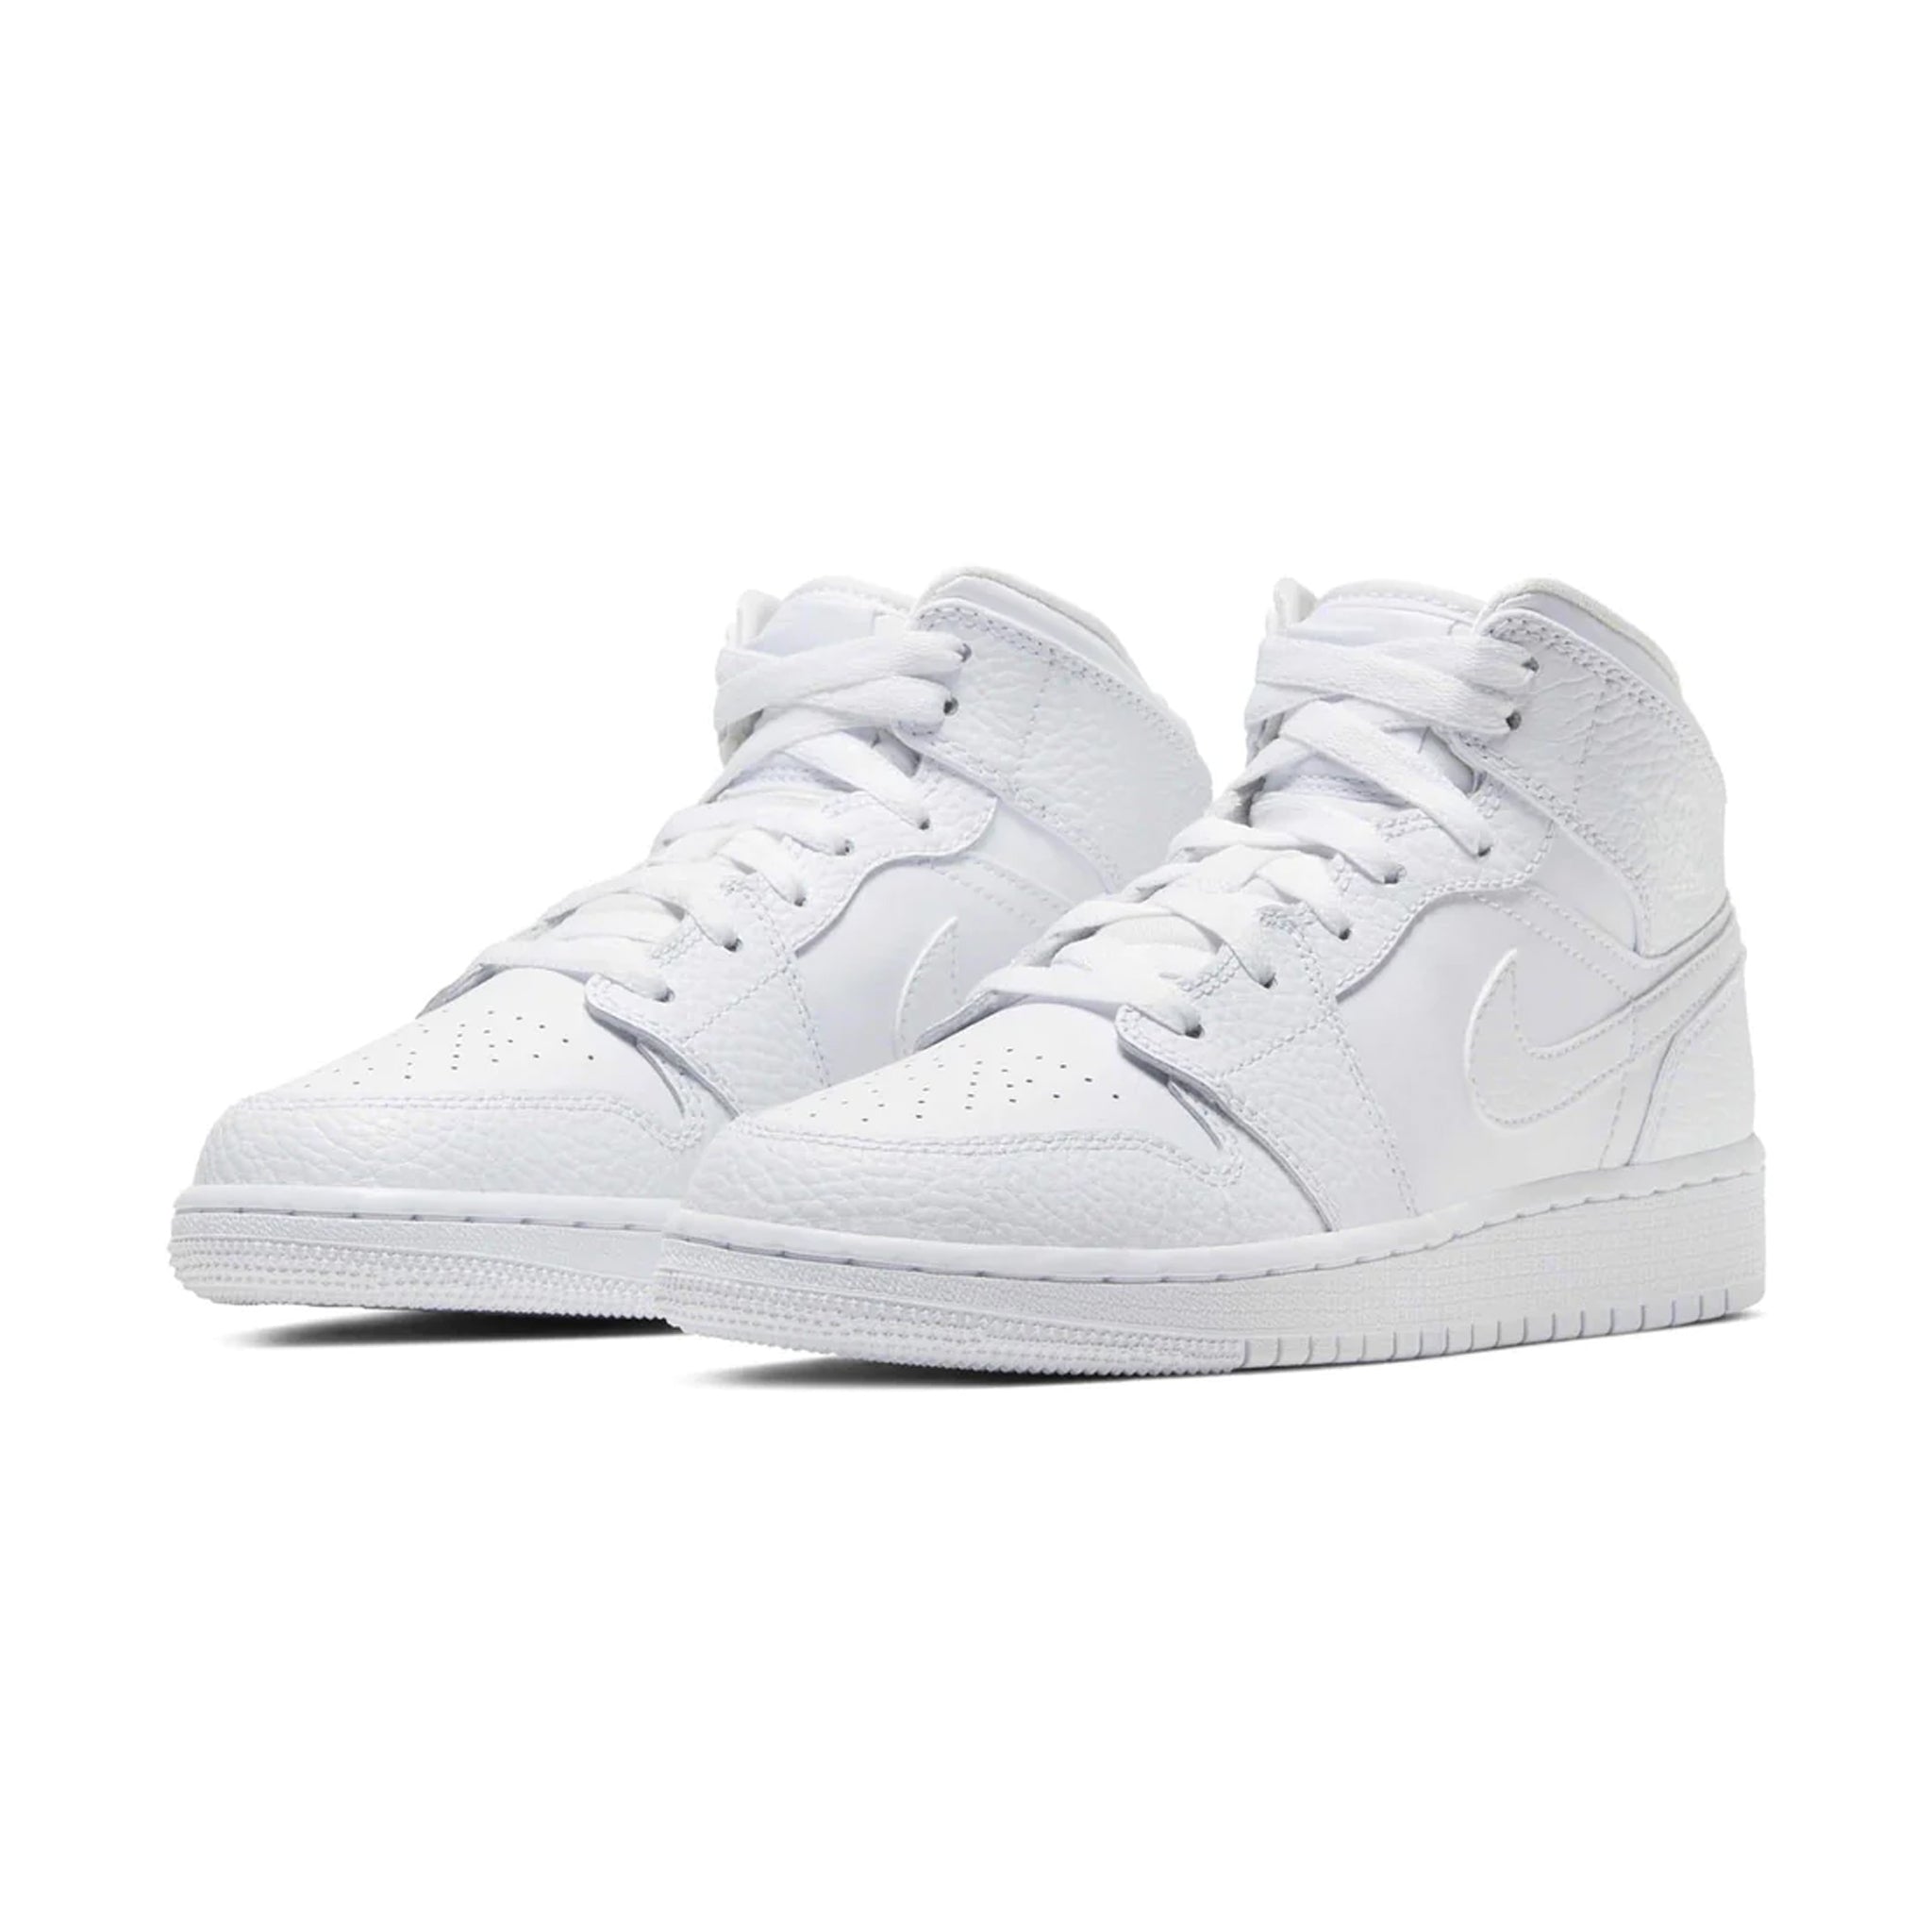 Front side view of Air Jordan 1 Mid Triple White (GS) 554725-130